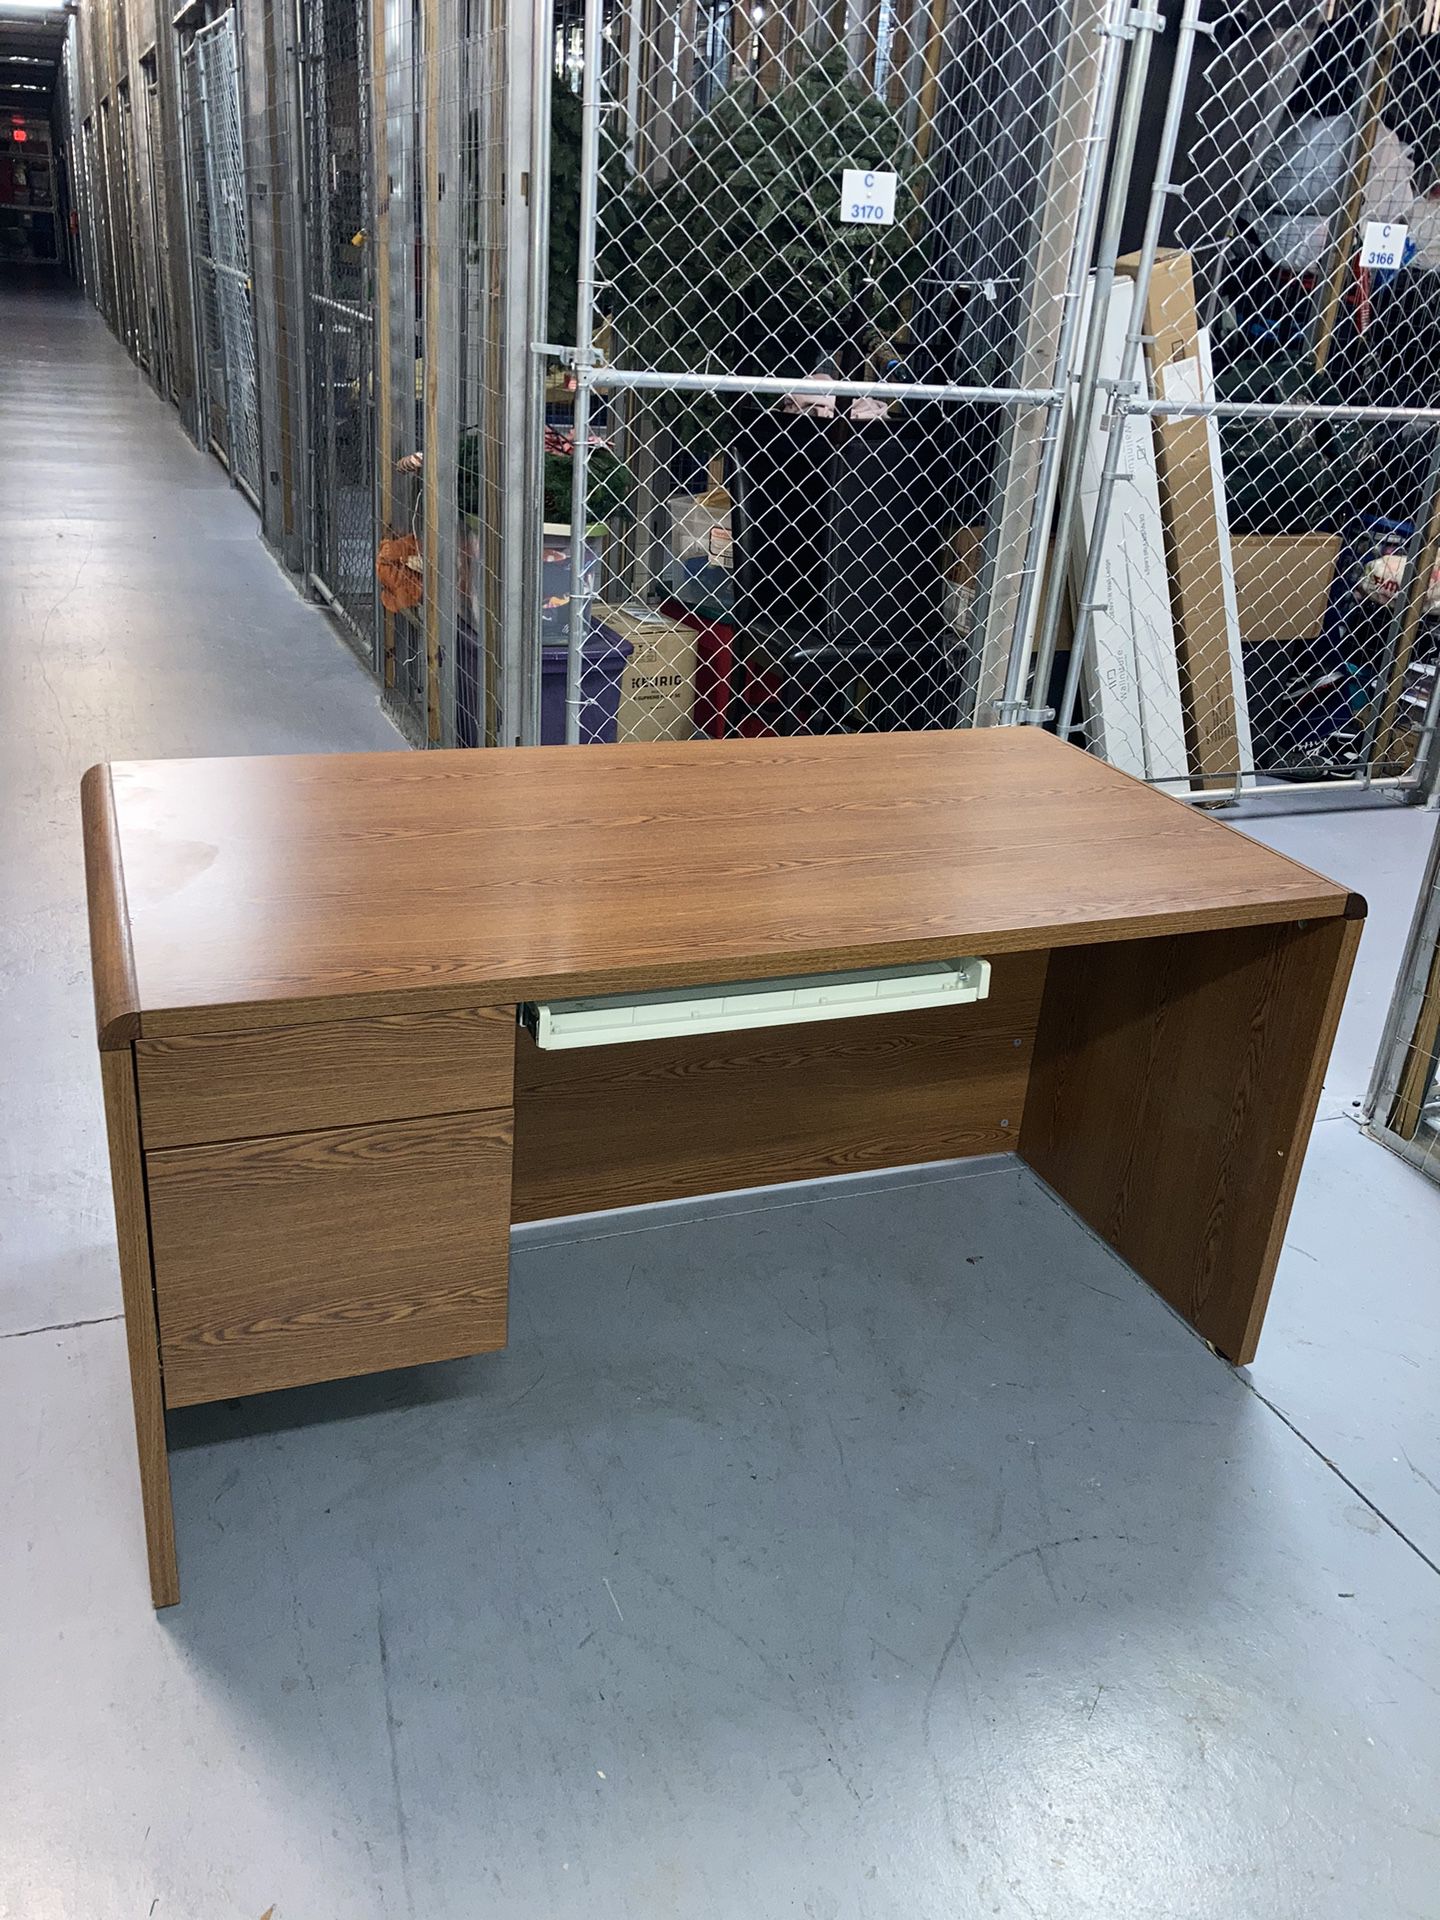 Hon Wood Office Desk DELIVERY~AVAILABLE 